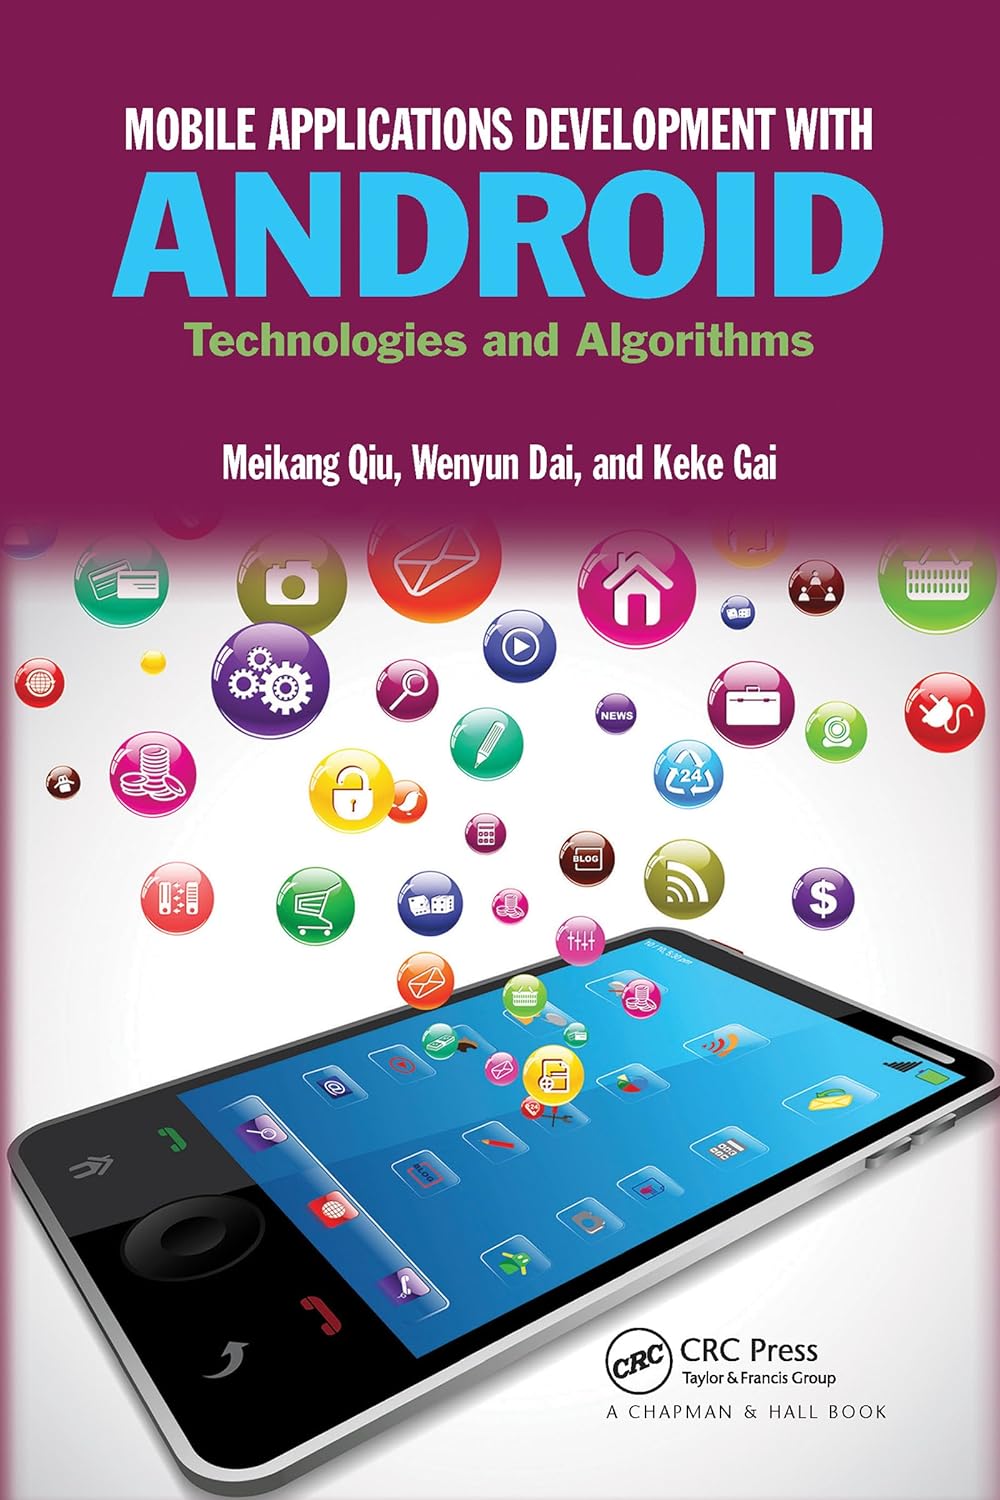 Mobile Applications Development with Android Technologies and Algorithms